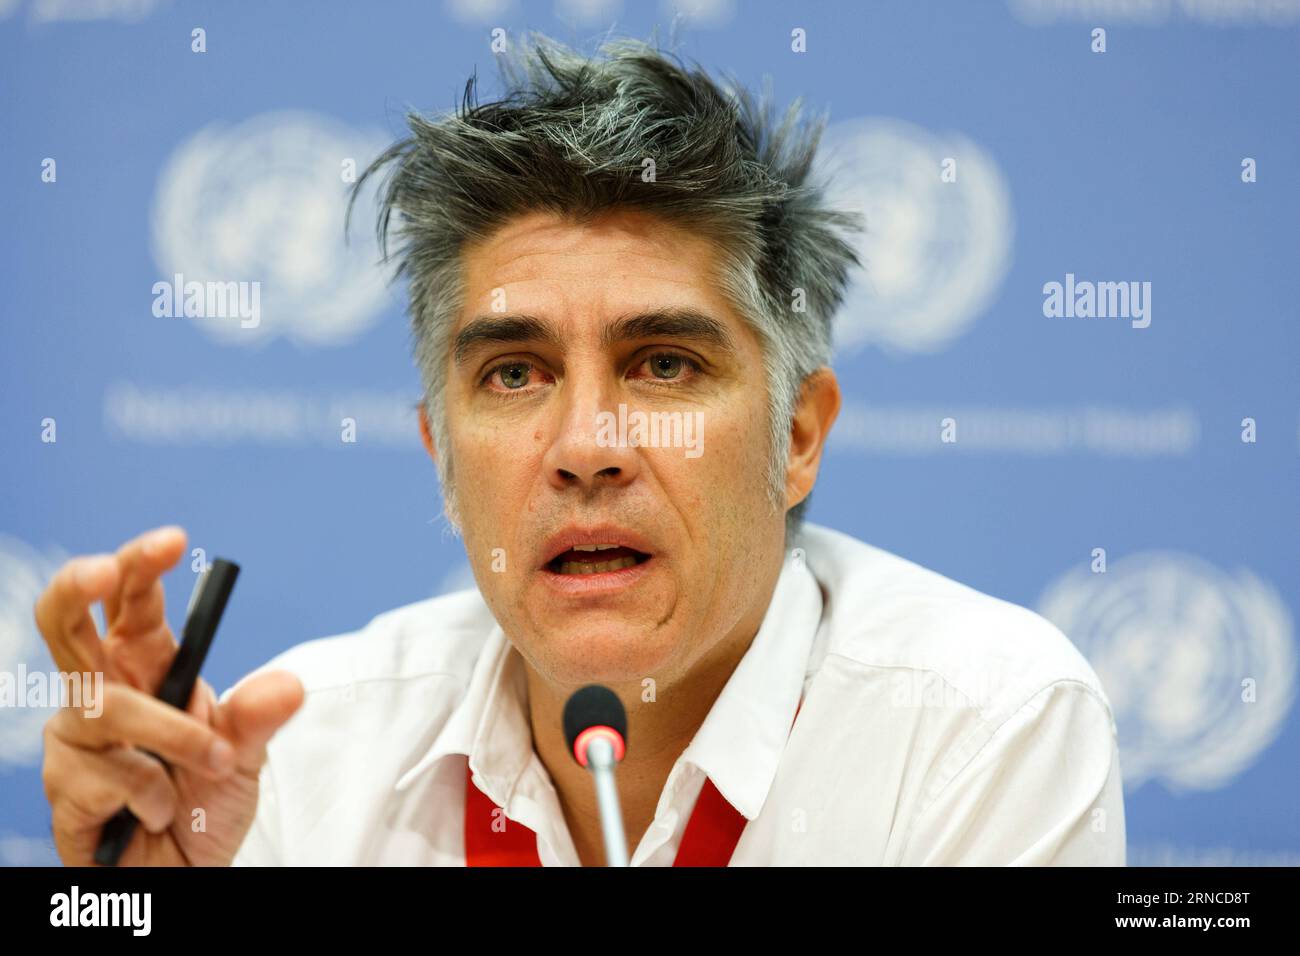 (160405) -- NEW YORK, April 5, 2016 -- Alejandro Aravena, Chilean architect and winner of the Pritzker Architecture Prize for 2016, briefs journalists on the link between architecture and sustainable development, at the United Nations headquarters in New York, April 5, 2016. The Sustainable Development Goals Fund (SDGF) and Pritzker Architecture Prize laureate Alejandro Aravena draw on the role of architecture to improve livelihoods and achieve Sustainable Development Goals (SDG). ) UN-NEW YORK-ALEJANDRO ARAVENA-PRESS CONFERENCE LixMuzi PUBLICATIONxNOTxINxCHN   New York April 5 2016 Alejandro Stock Photo